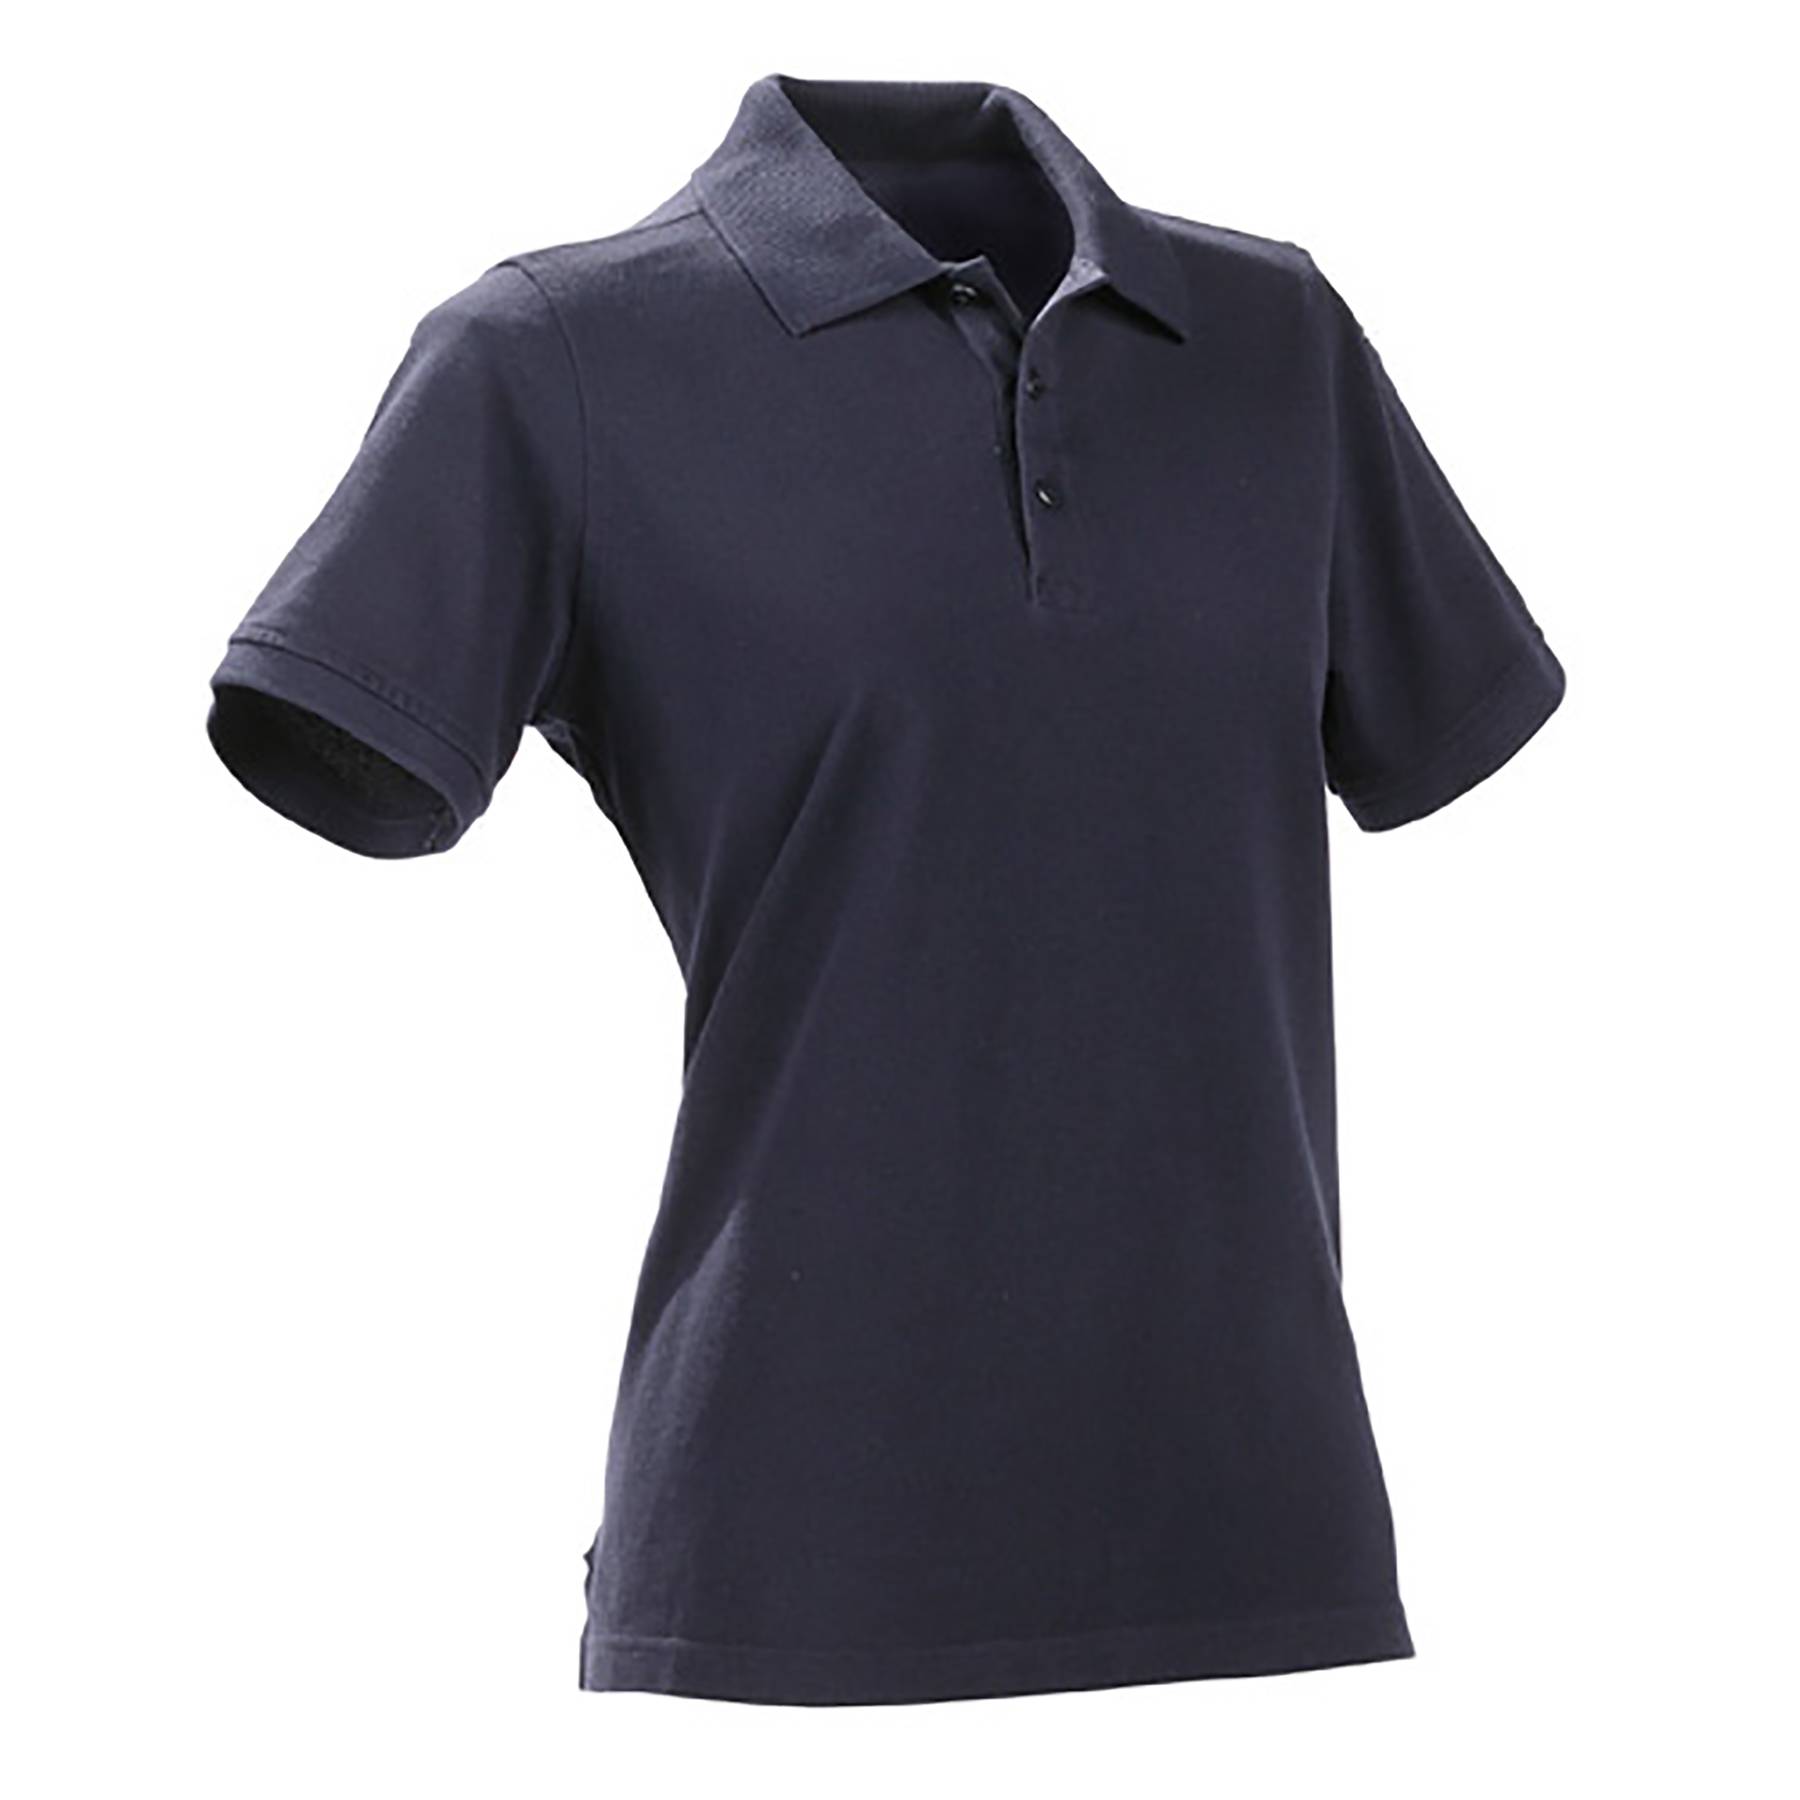 5.11 TACTICAL WOMEN'S SHORT SLEEVE PROFESSIONAL POLO NEW FIT